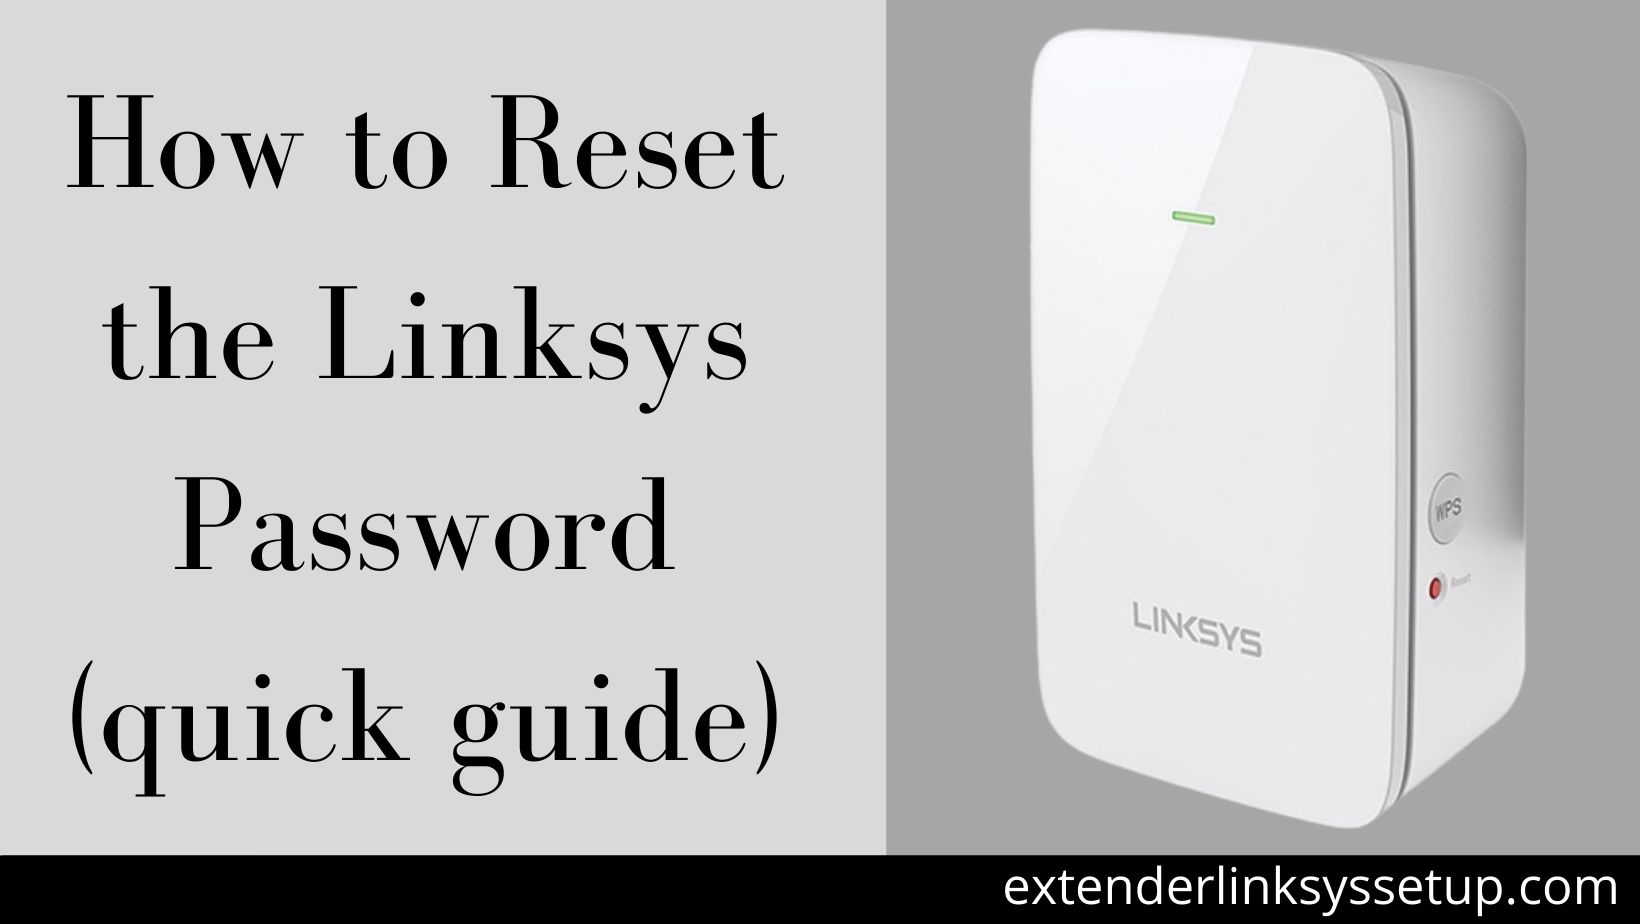 How to Reset the Linksys Password